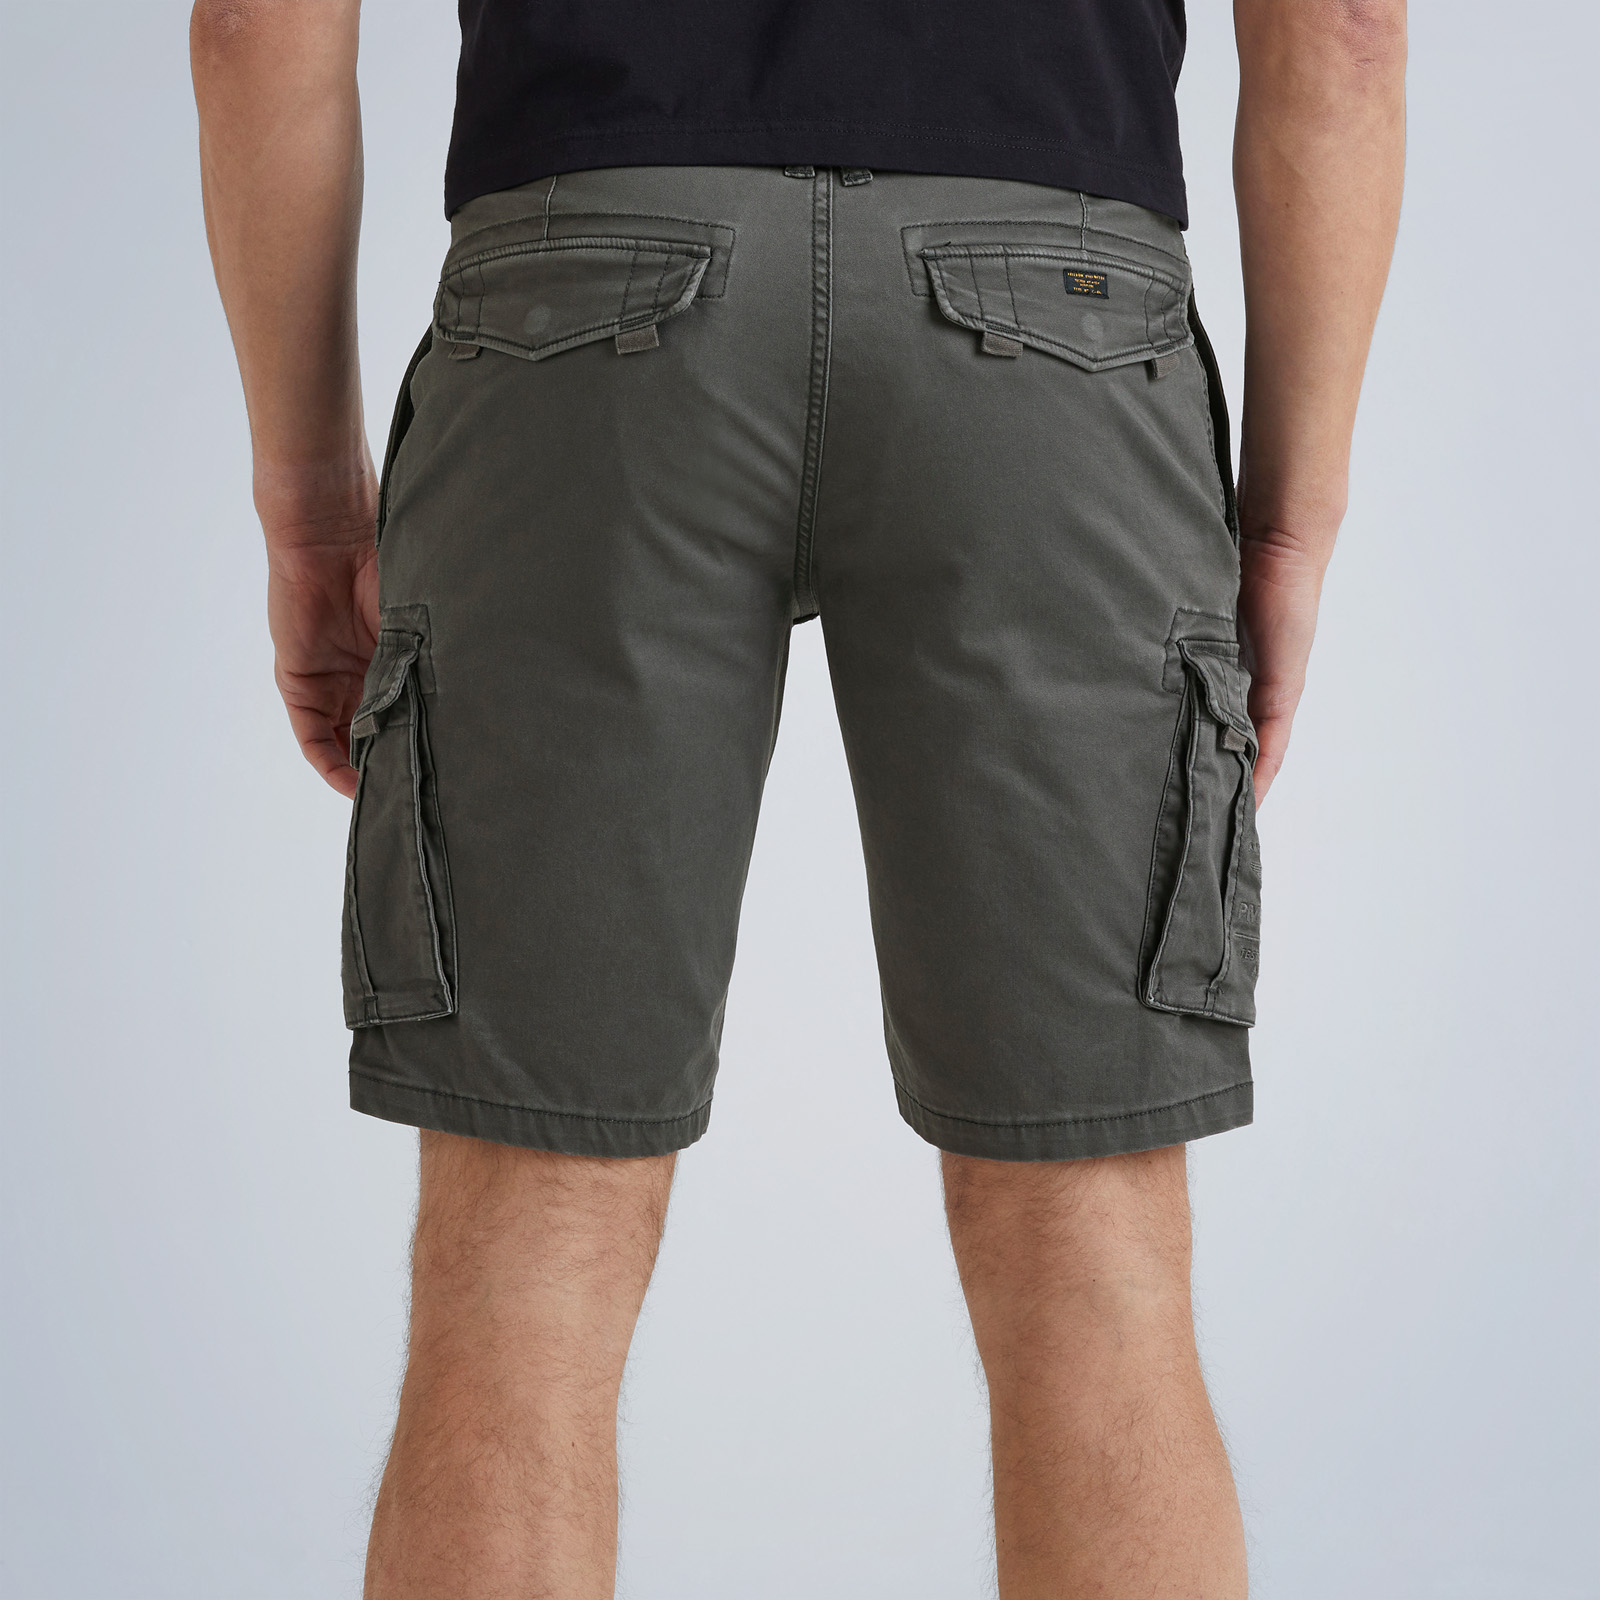 PME LEGEND and returns Free Short shipping | Twill | Cargo Stretch